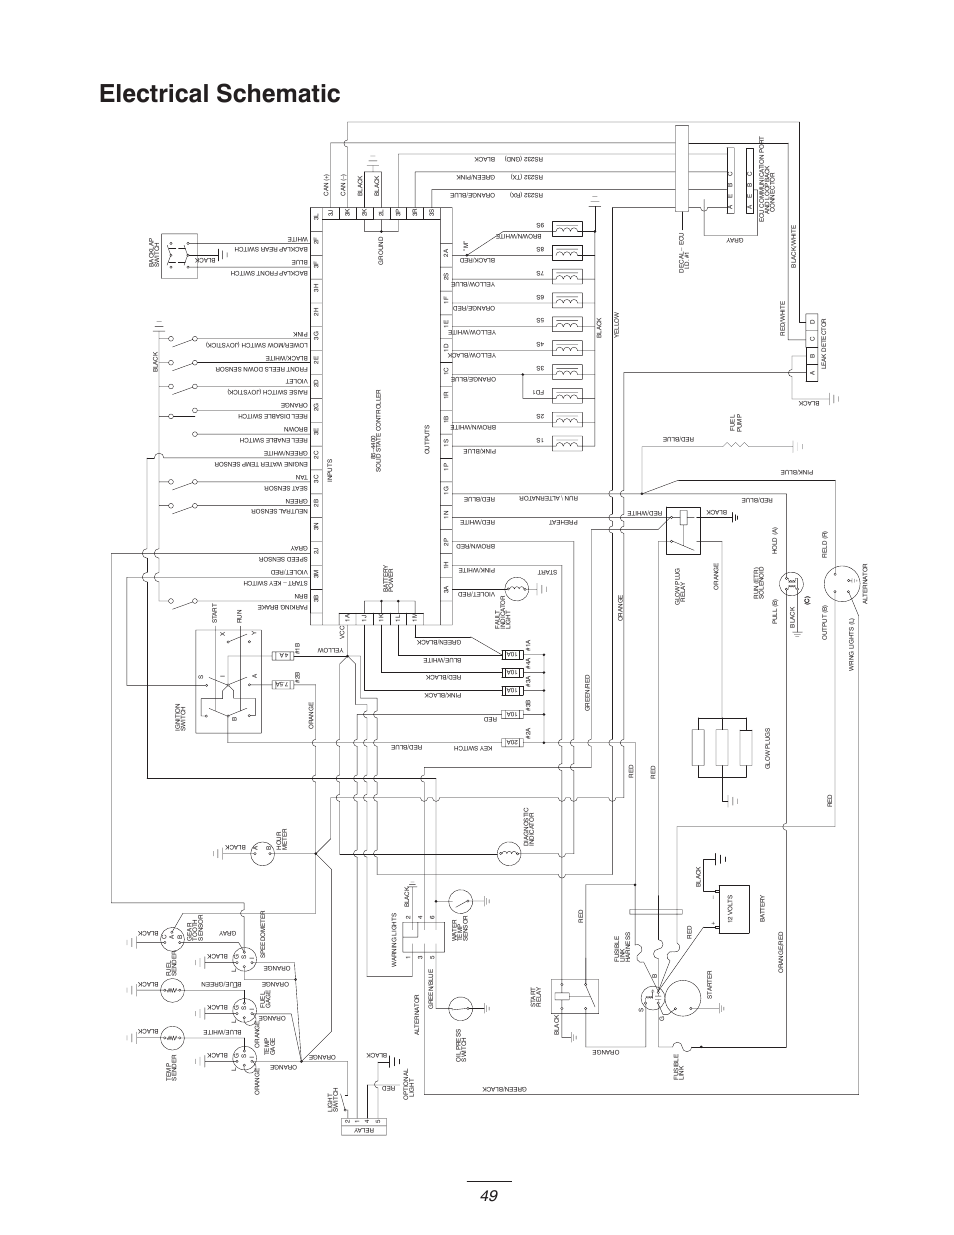 Electrical schematic | Toro 5400-D User Manual | Page 49 / 52